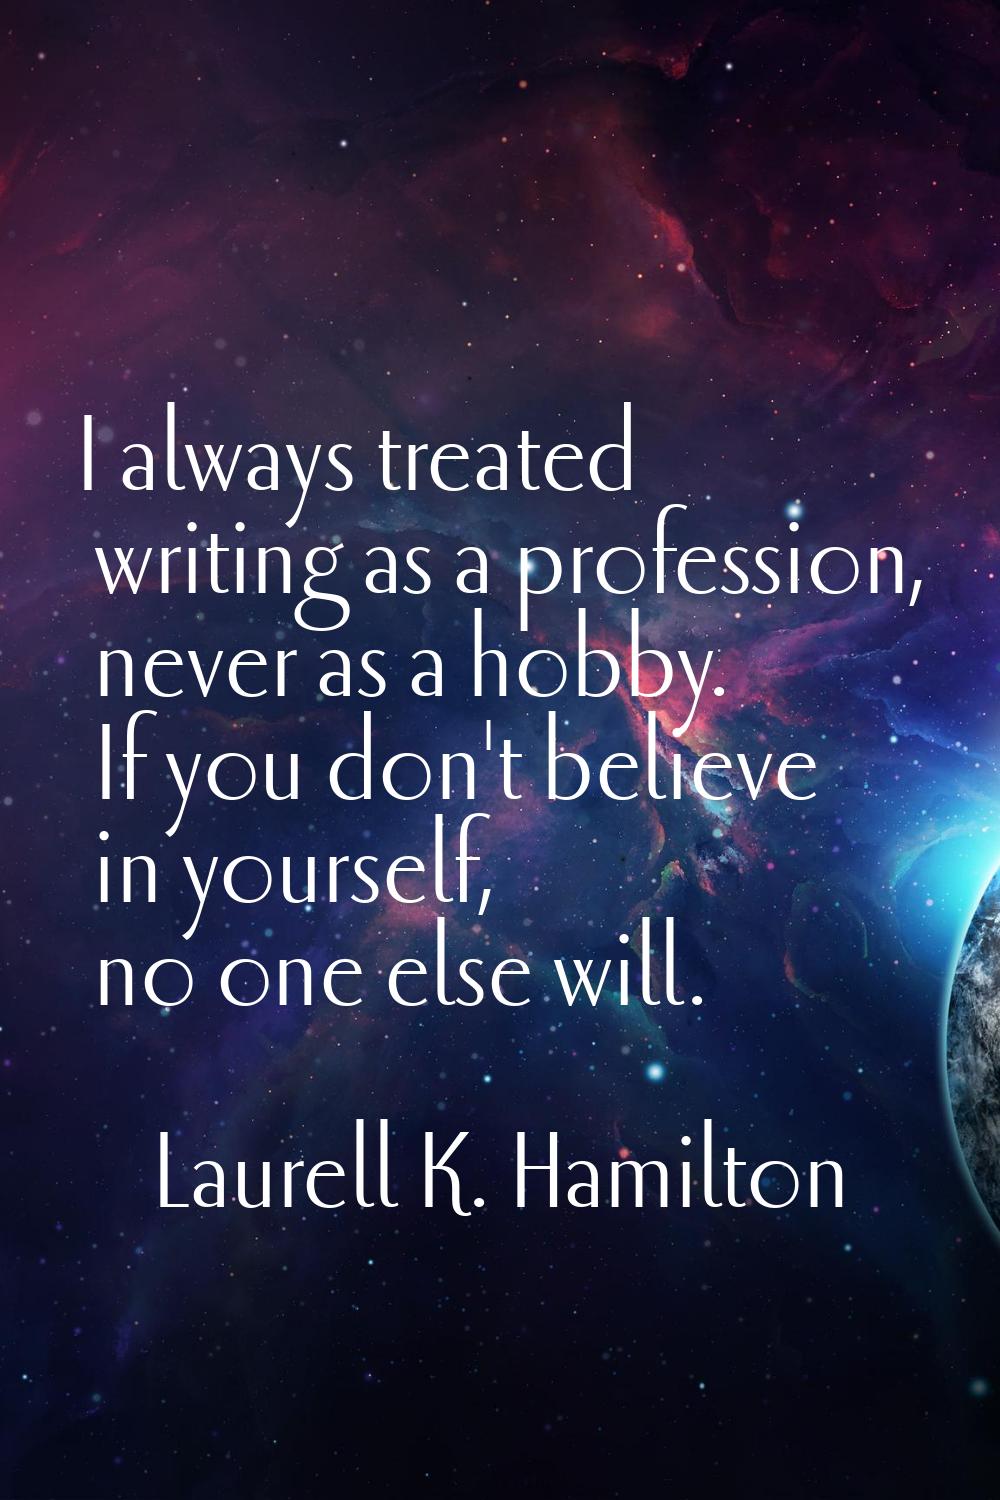 I always treated writing as a profession, never as a hobby. If you don't believe in yourself, no on